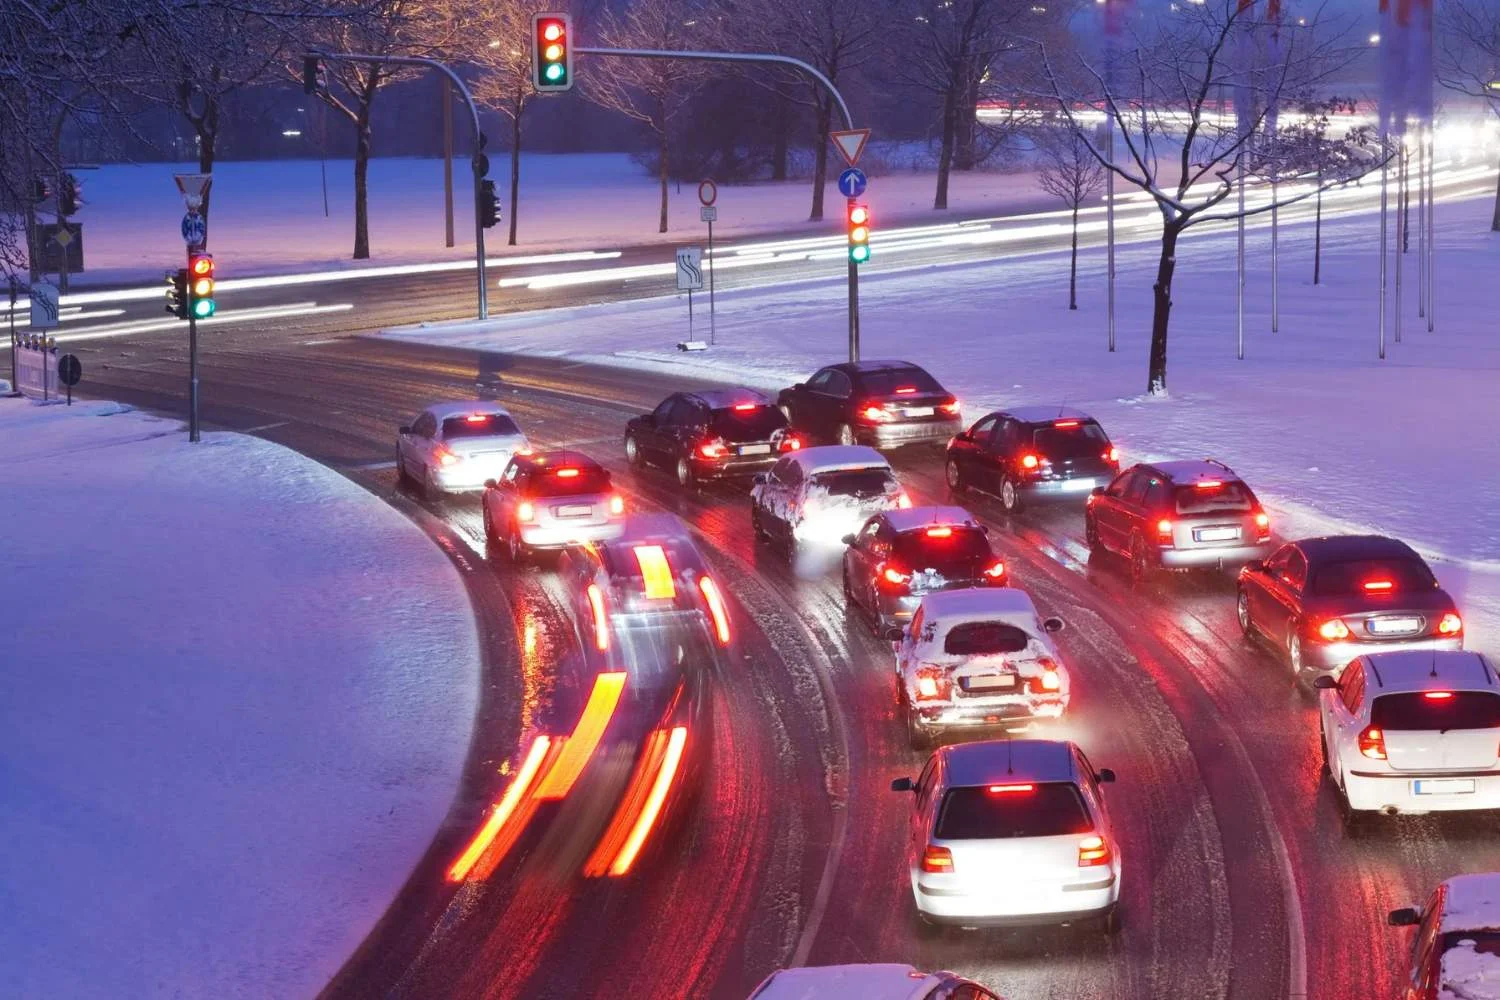 Image shows bunch of automobiles on a slippery road with Snow